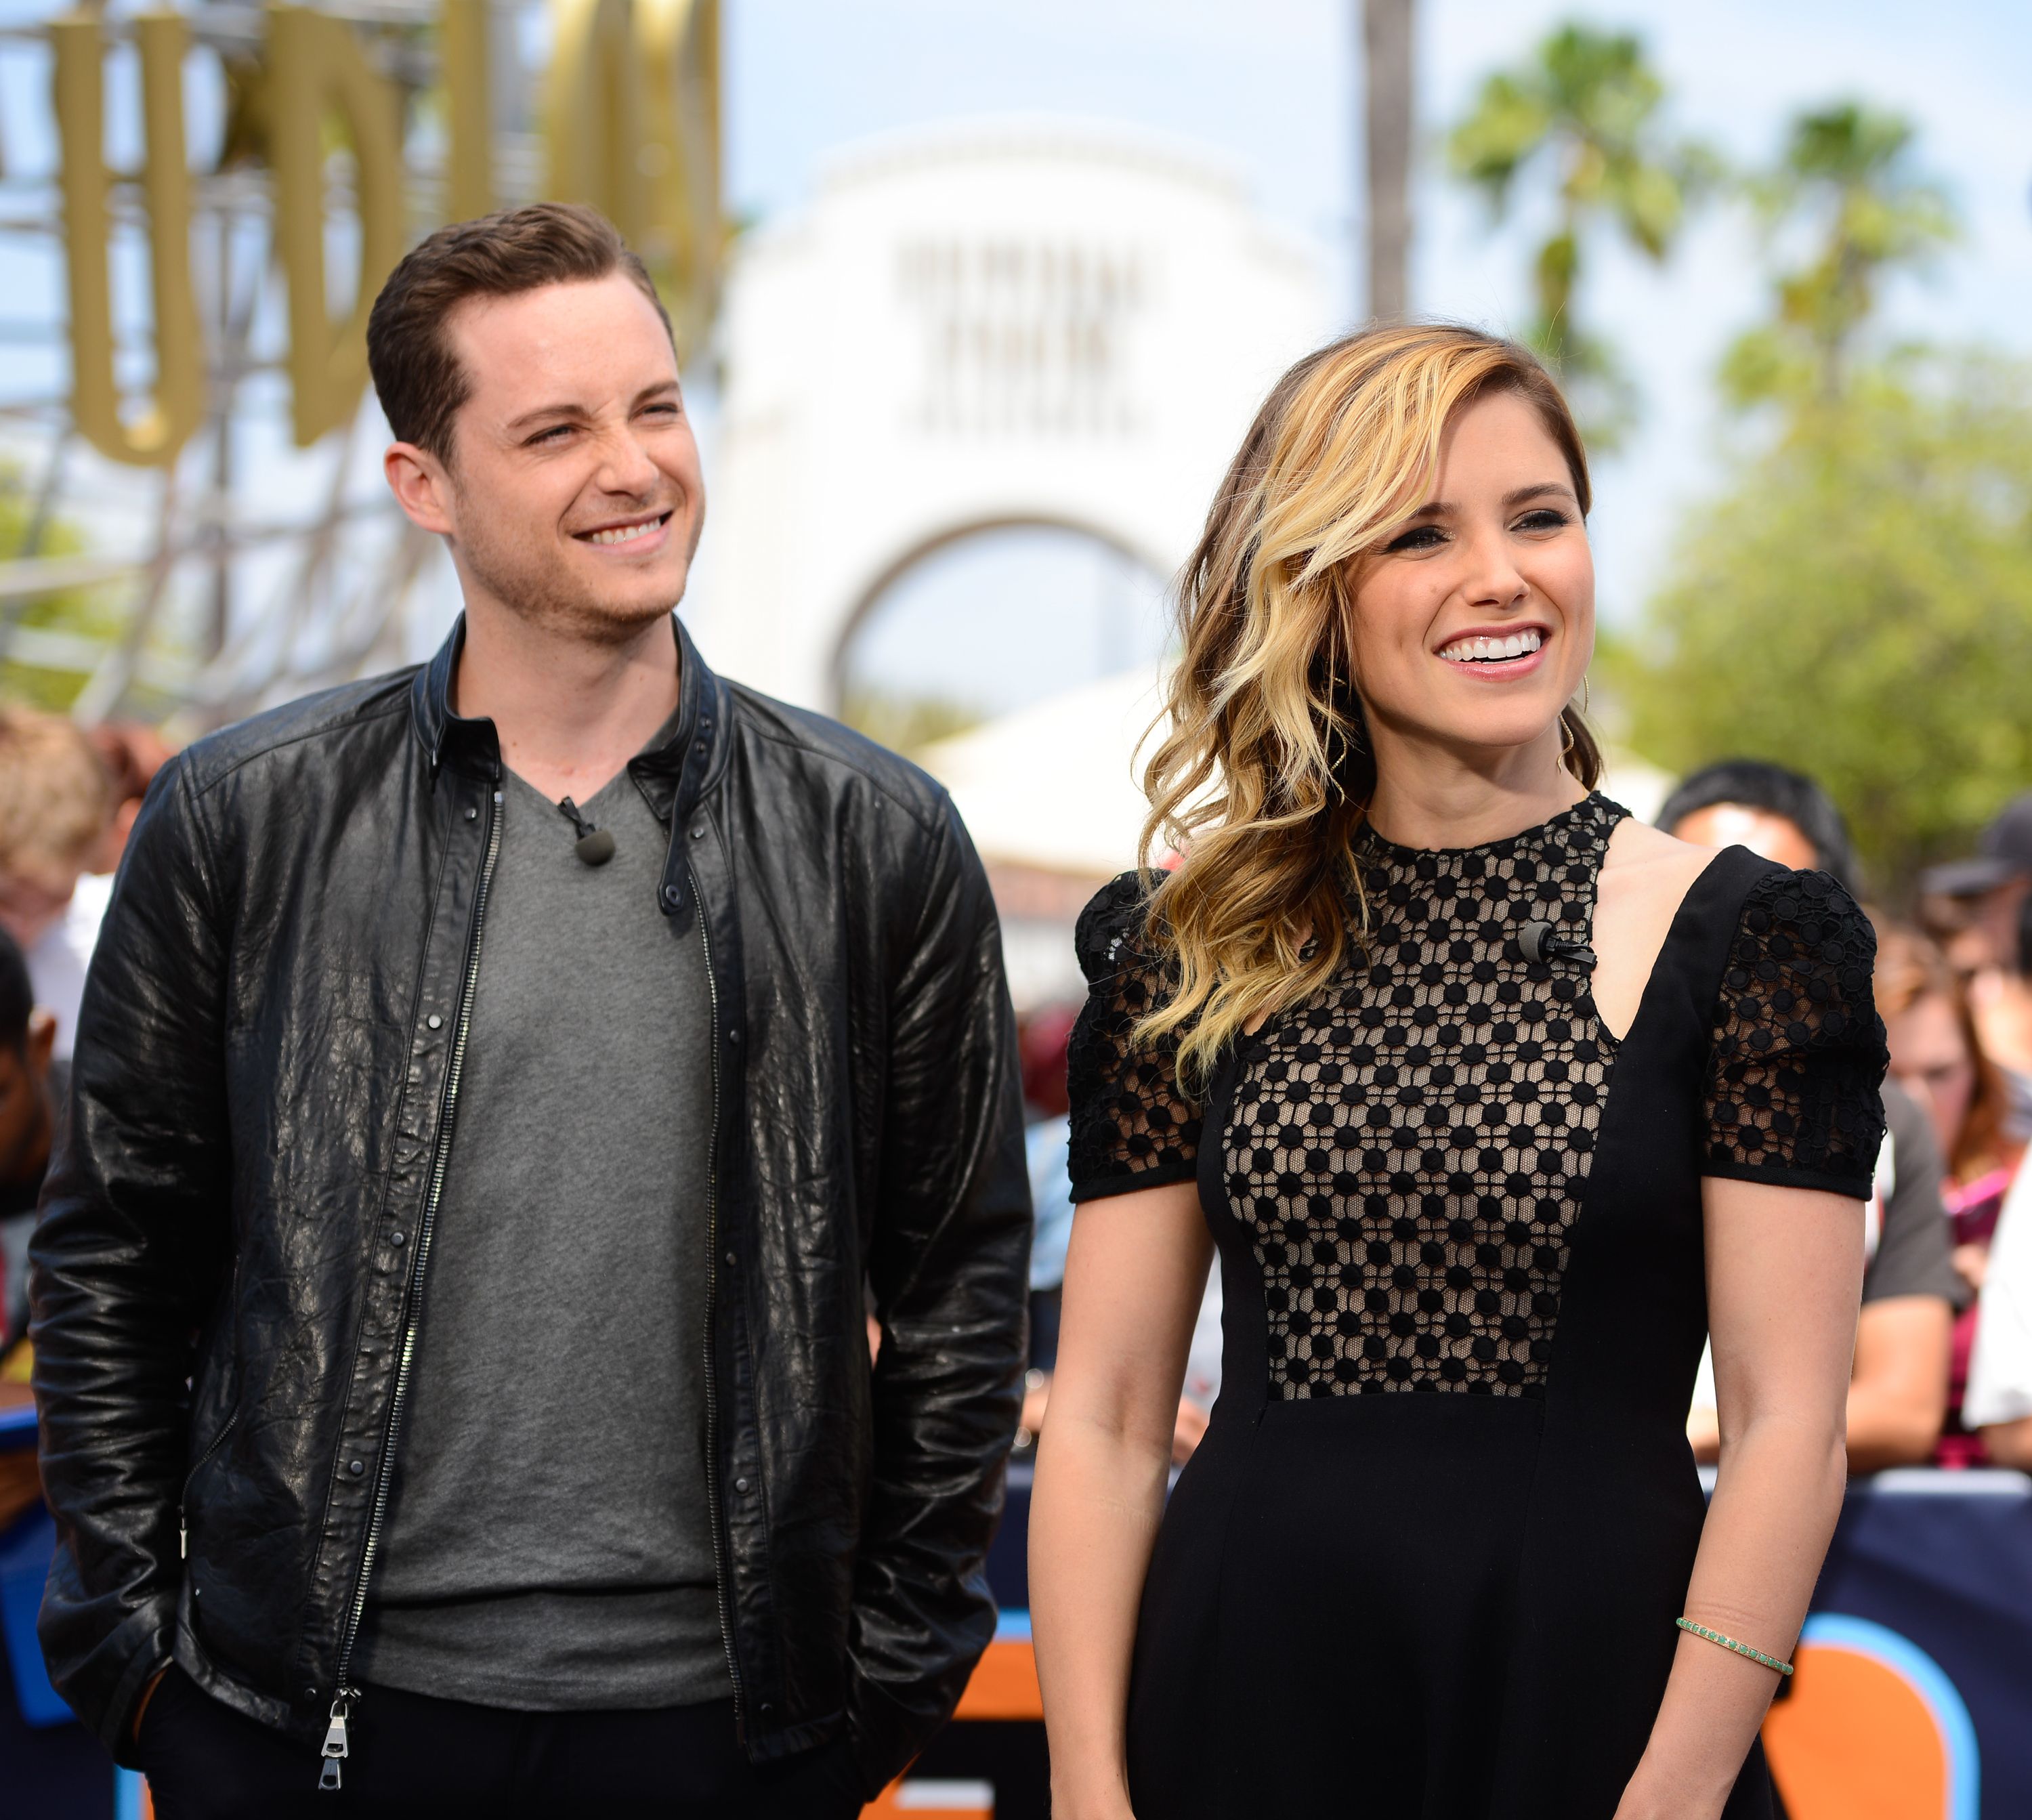 Jesse Lee Soffer and Sophia Bush visit "Extra" at Universal Studios Hollywood on May 19, 2014, in Universal City, California | Photo: Noel Vasquez/Getty Images